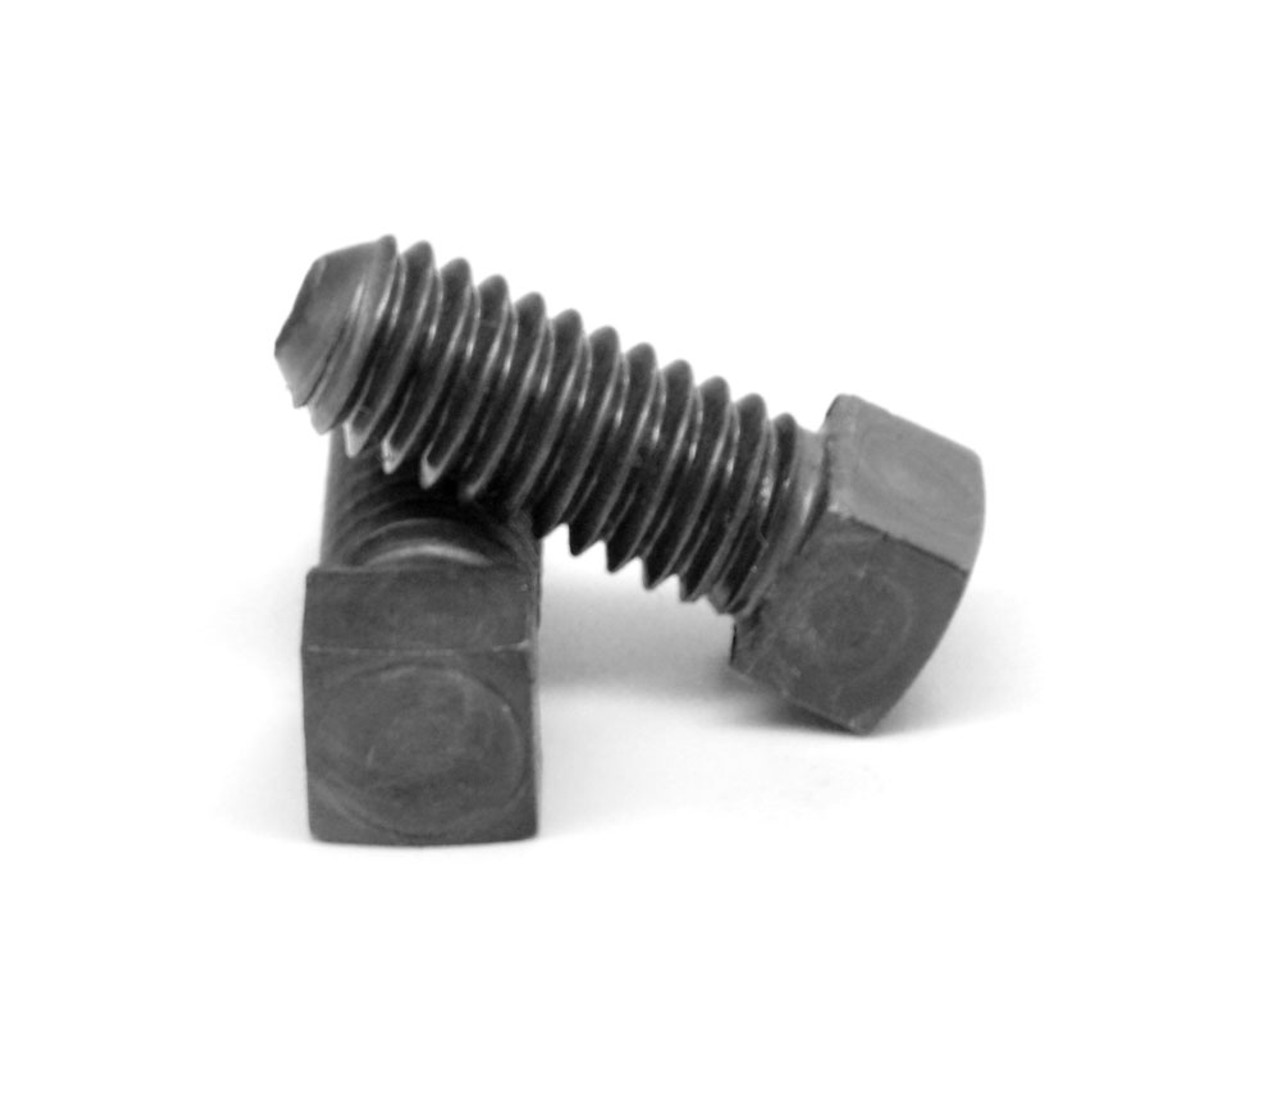 1 1/8"-7 x 6" (FT) Coarse Thread Square Head Set Screw Cup Point Low Carbon Steel Case Hardened Plain Finish